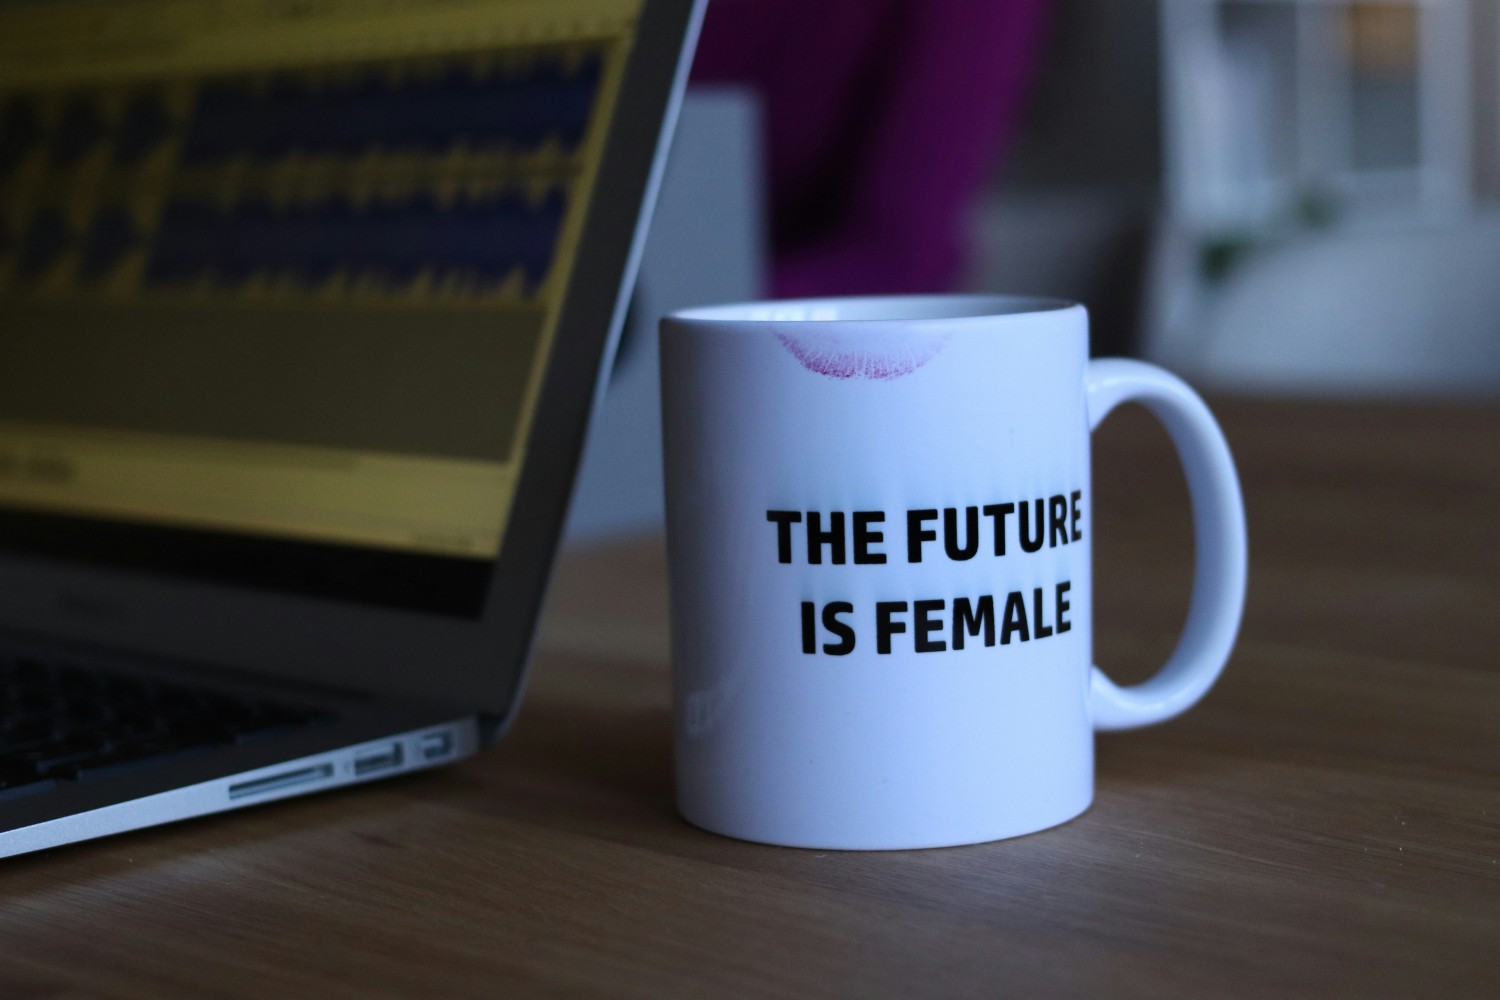 a photo of the words “the future is female” capturing the significance of women in society